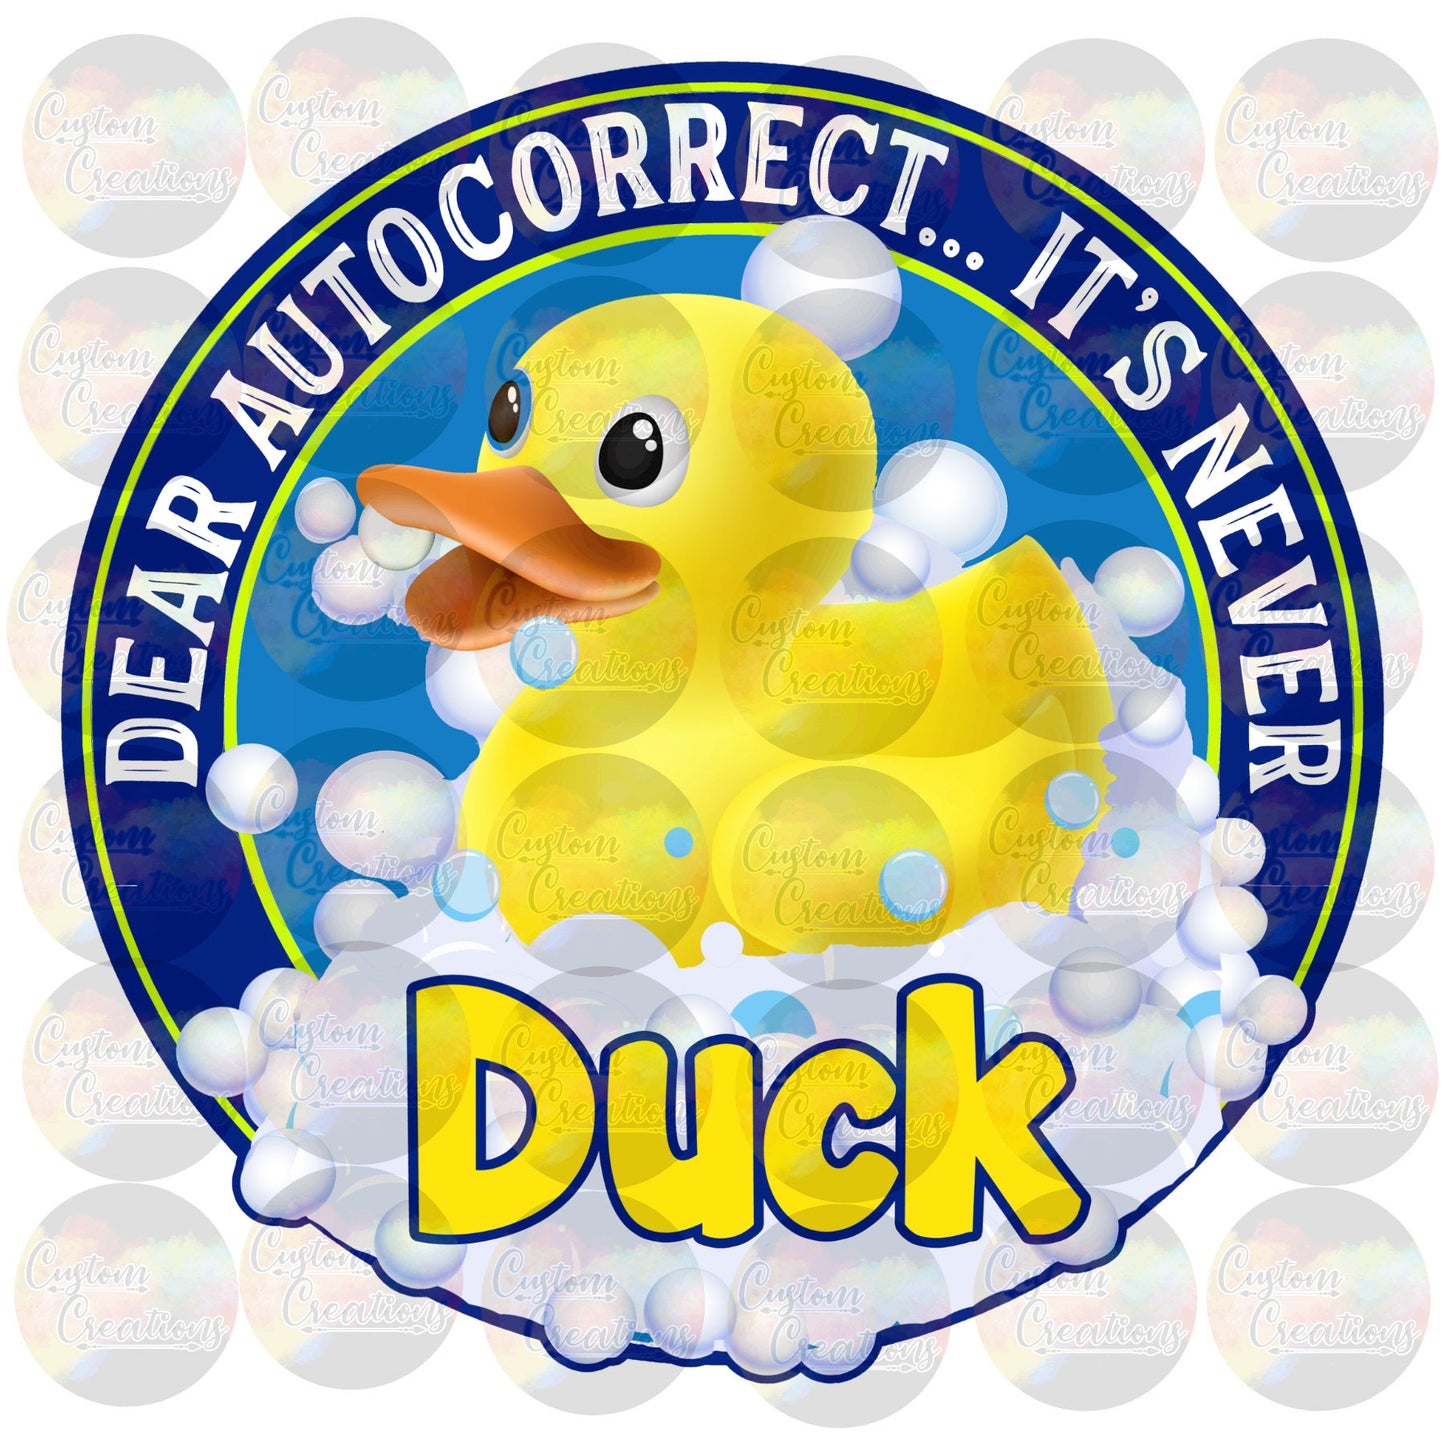 Auto Correct Duck Live Box Ducky Box Print 3.5" Clear Laser Printed Waterslide